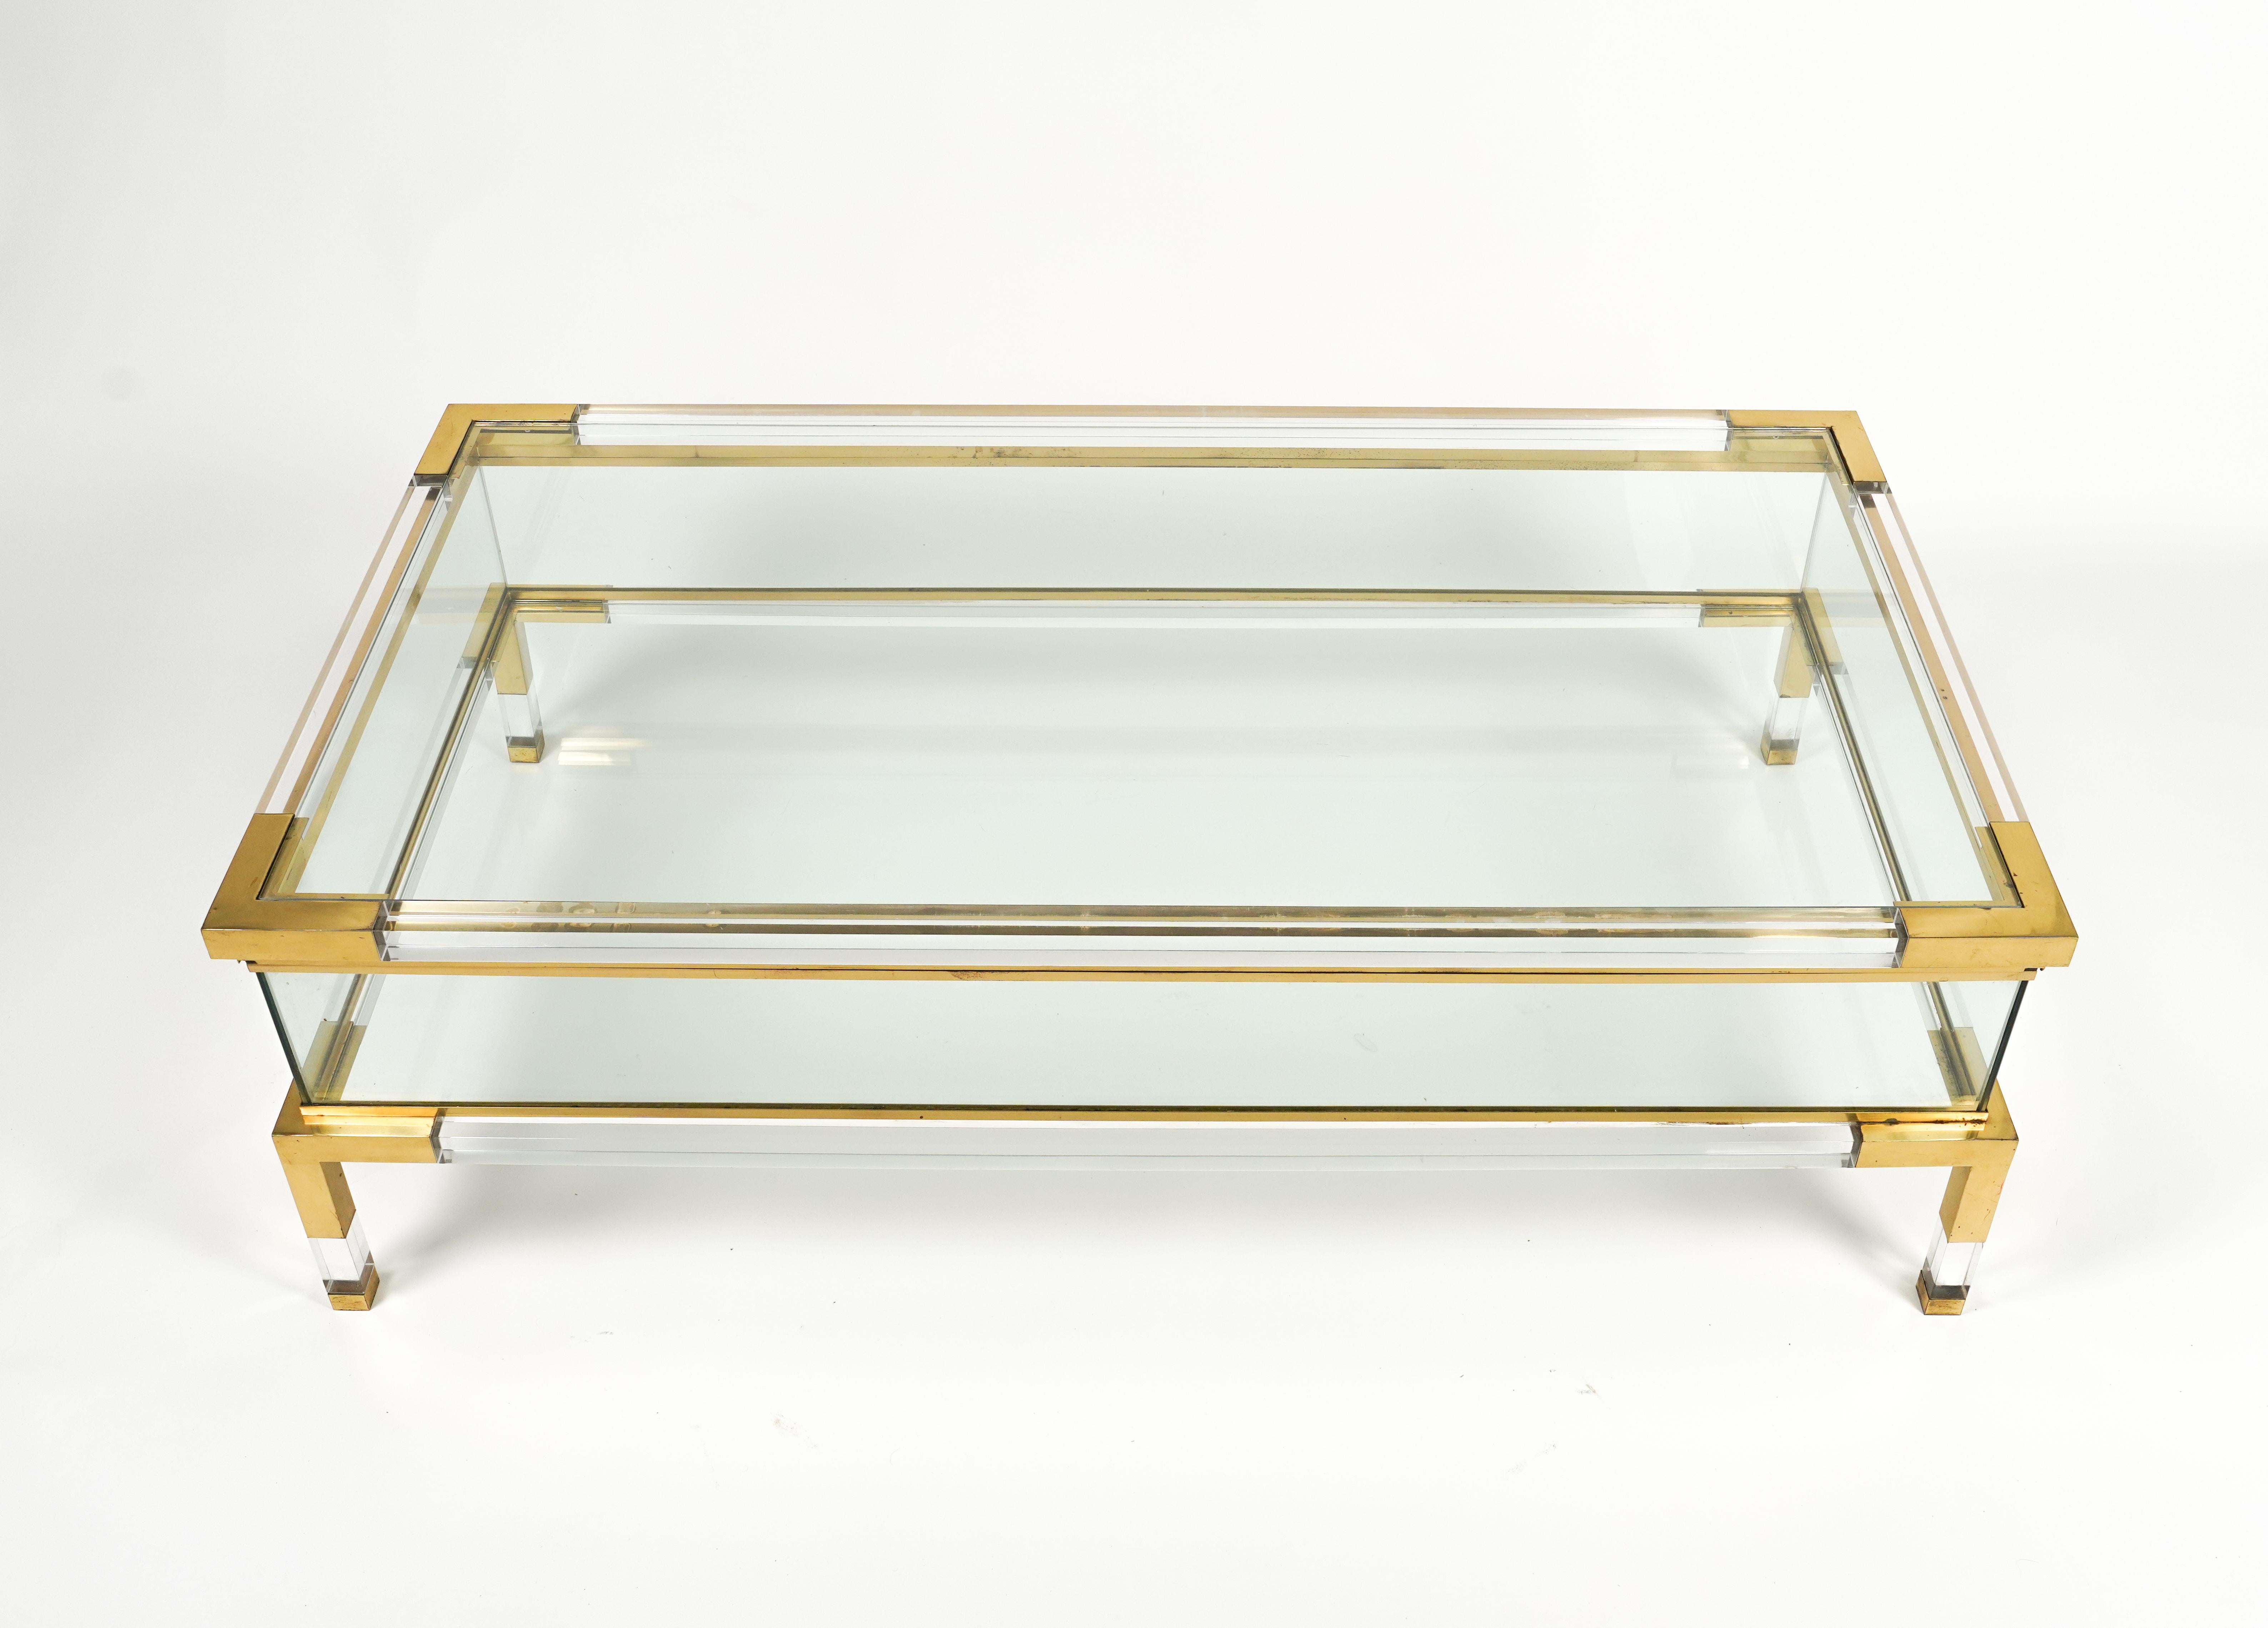 Midcentury Coffee Table in Lucite, Brass & Glass by Maison Jansen, France 1970s For Sale 3